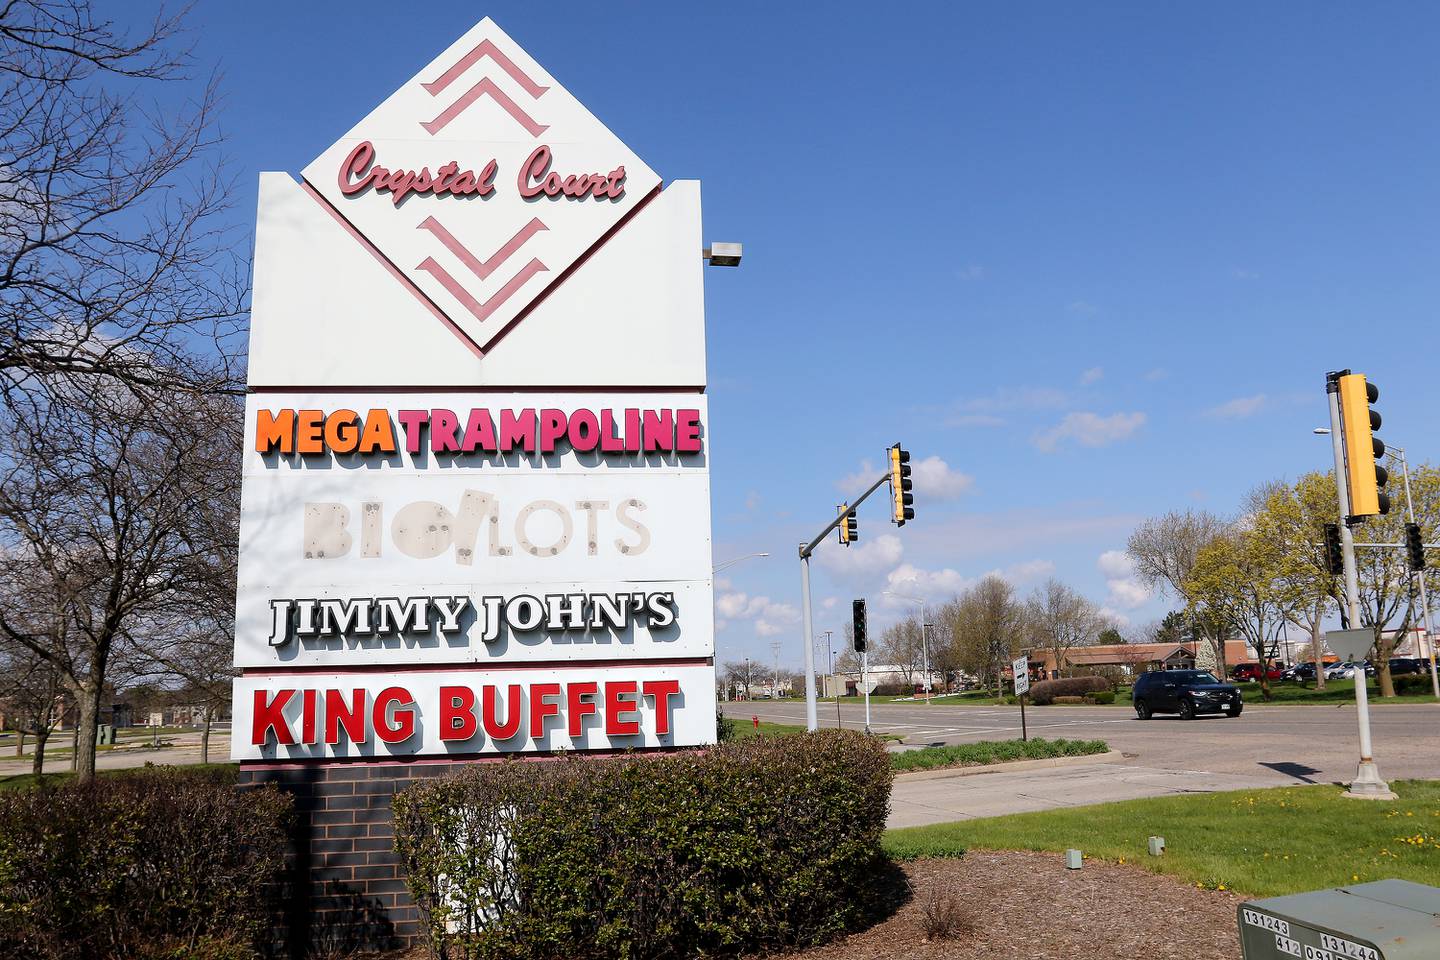 The Crystal Court shopping center is seen on Wednesday, April 21, 2021, in Crystal Lake.